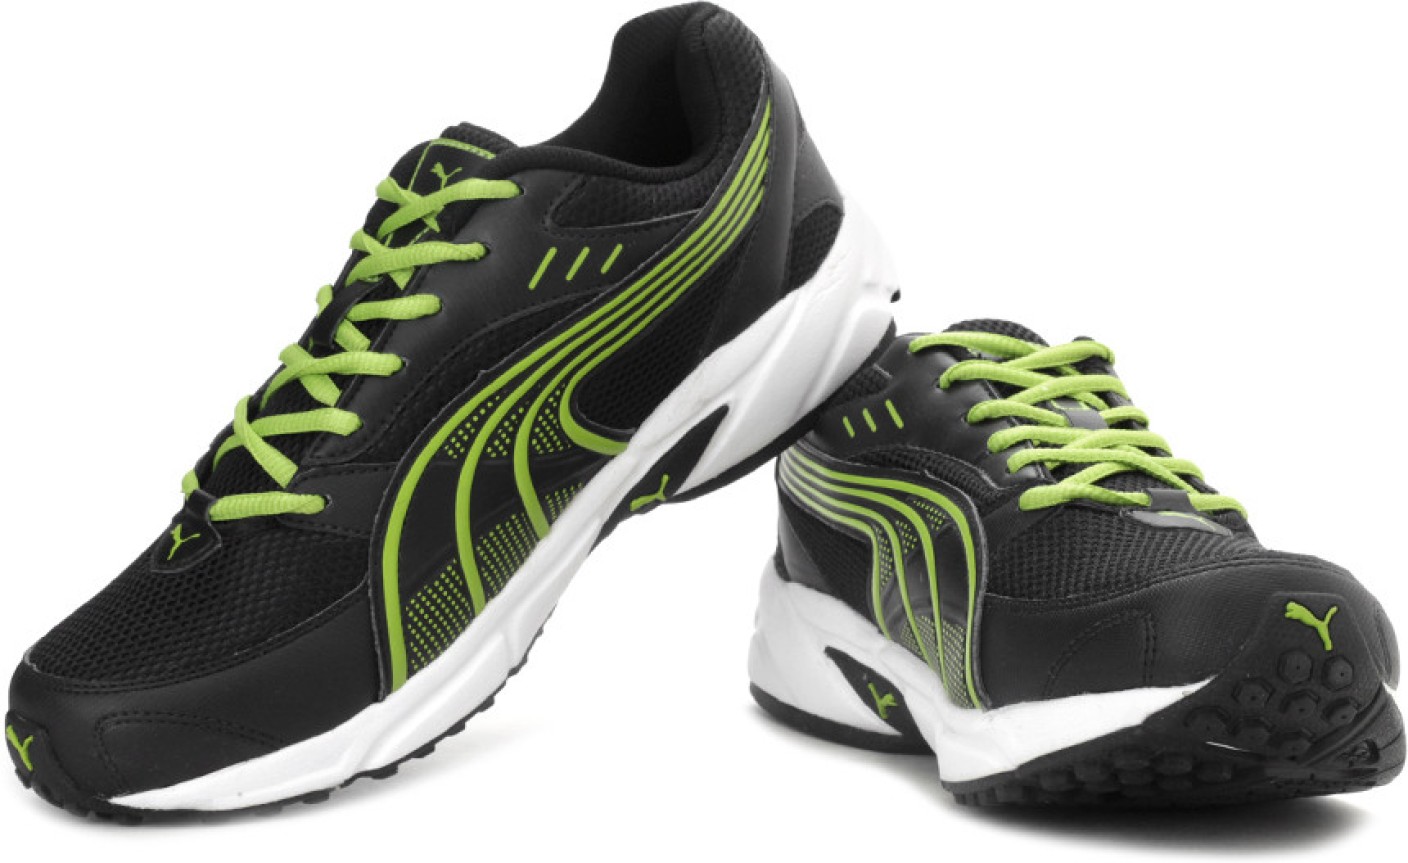 Puma Running Shoes For Men - Buy Black, Green Color Puma Running Shoes ...